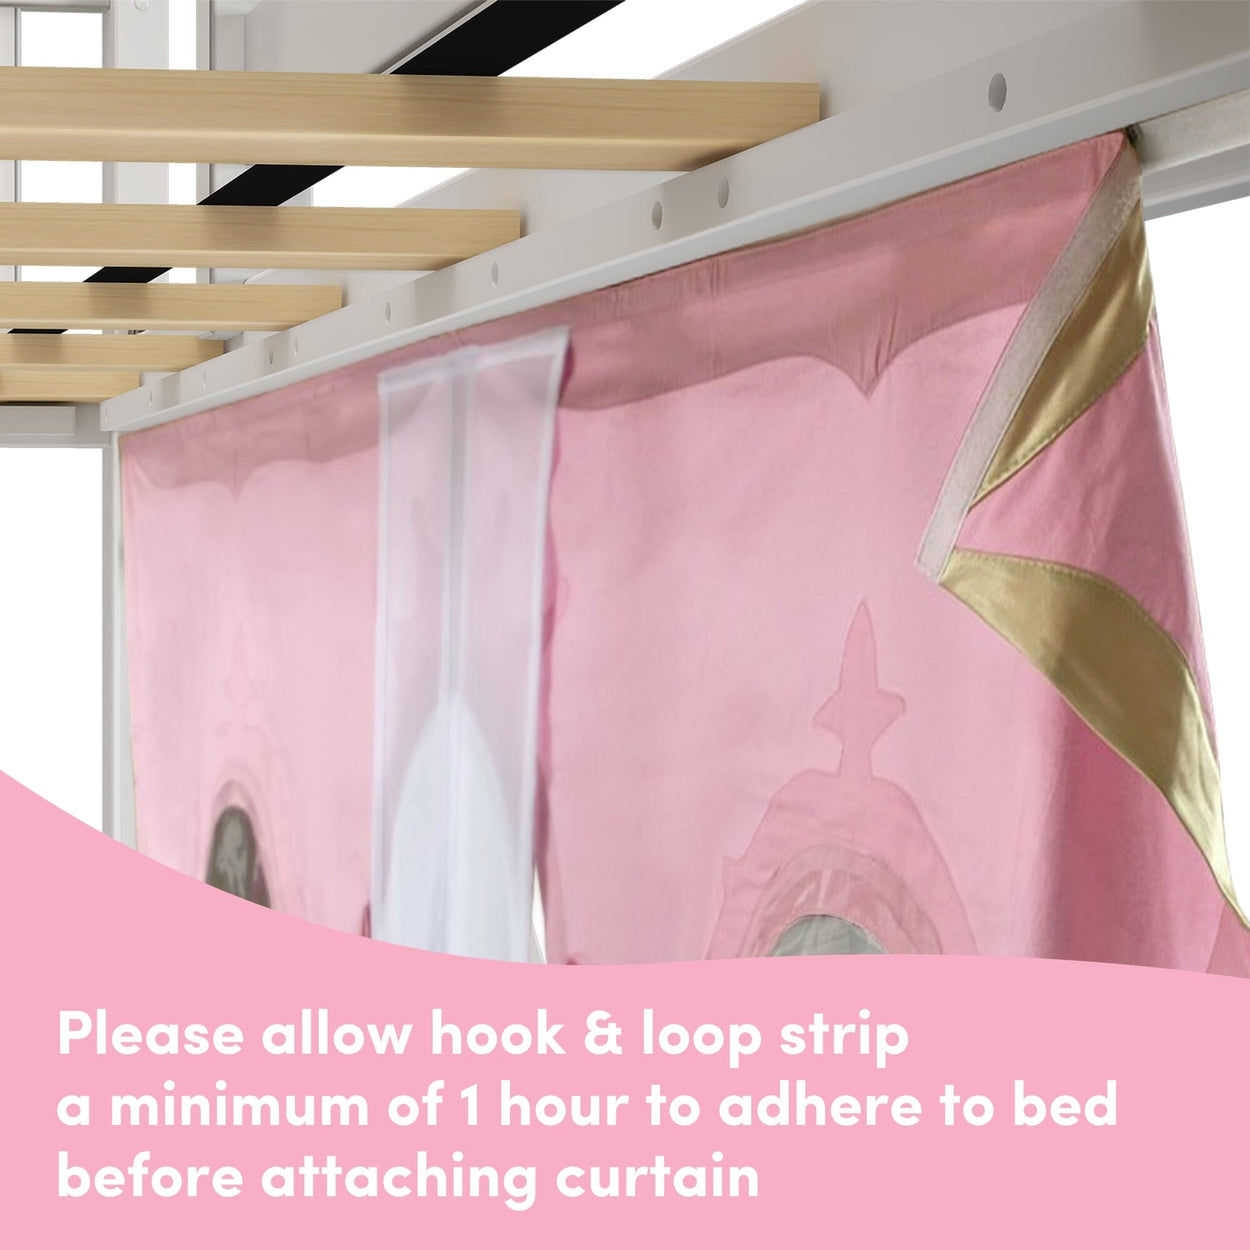 180425002083 : Loft Beds Low Loft with Stairs, Easy Slide and Light Pink and Gold Princess Curtain, White